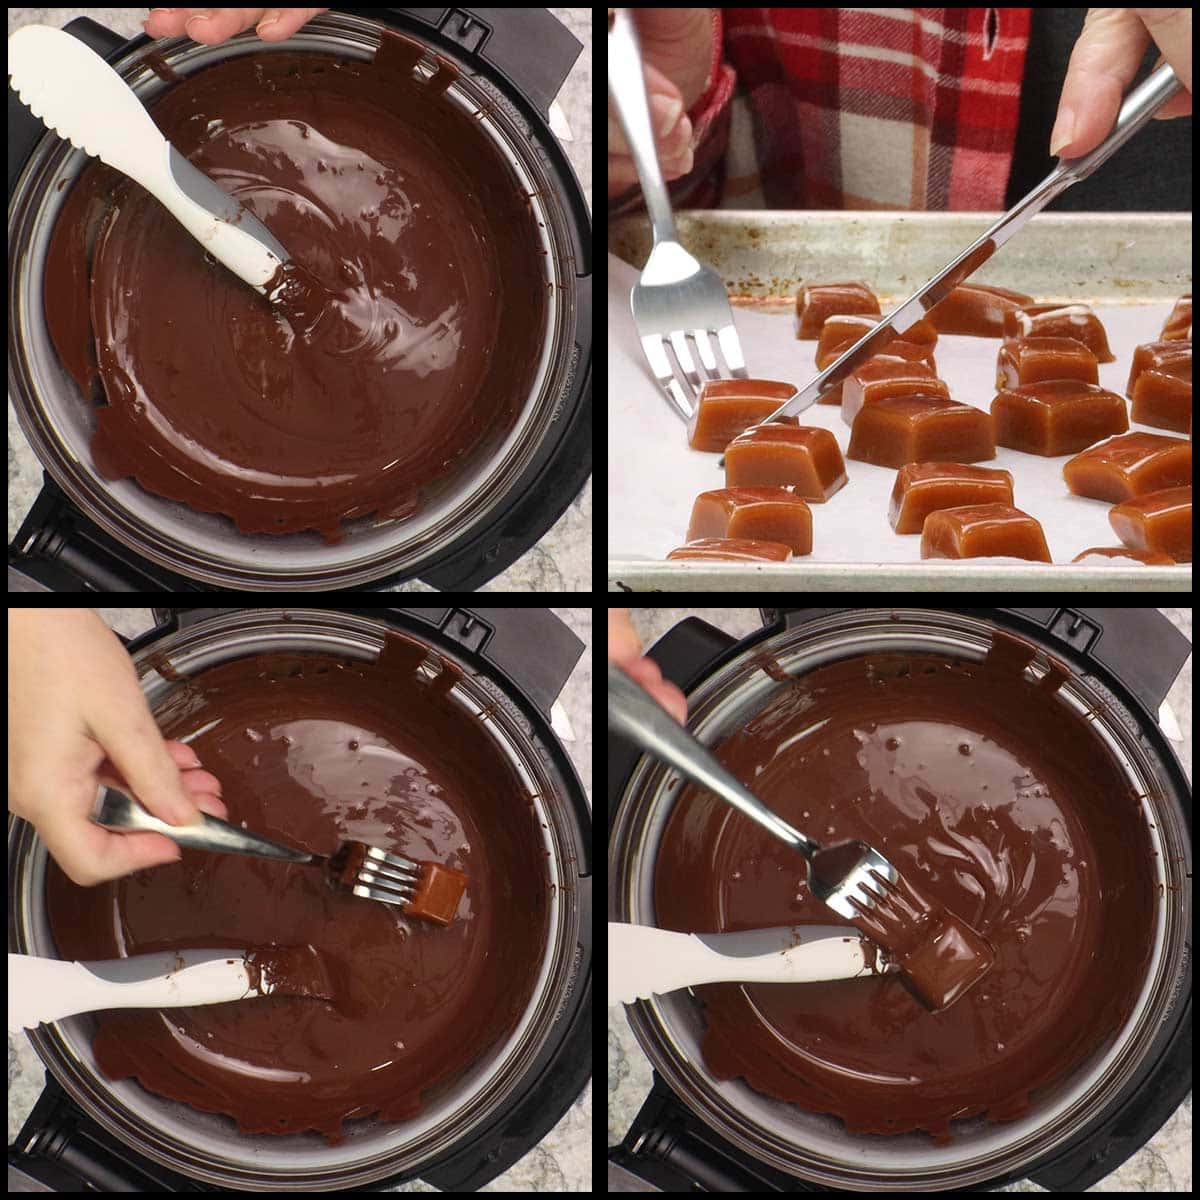 dipping a caramel candy into chocolate.